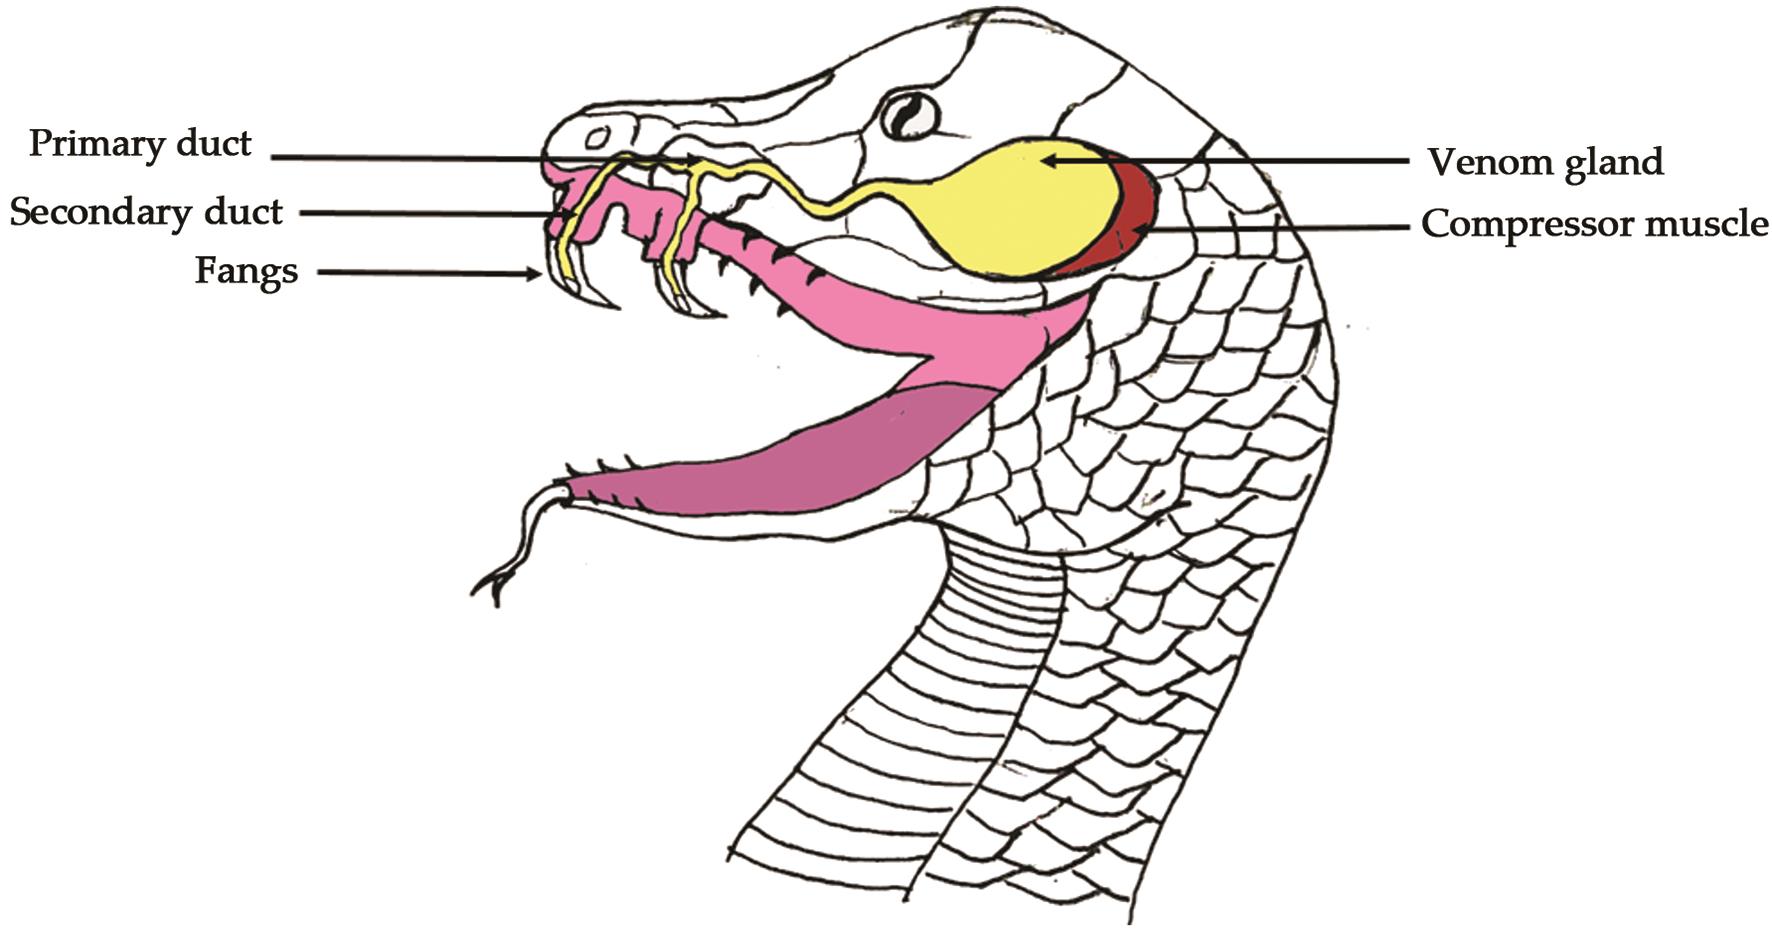 The anatomical presence of the venom gland with fangs, primary duct, secondary duct and compressive muscle in the snakehead.